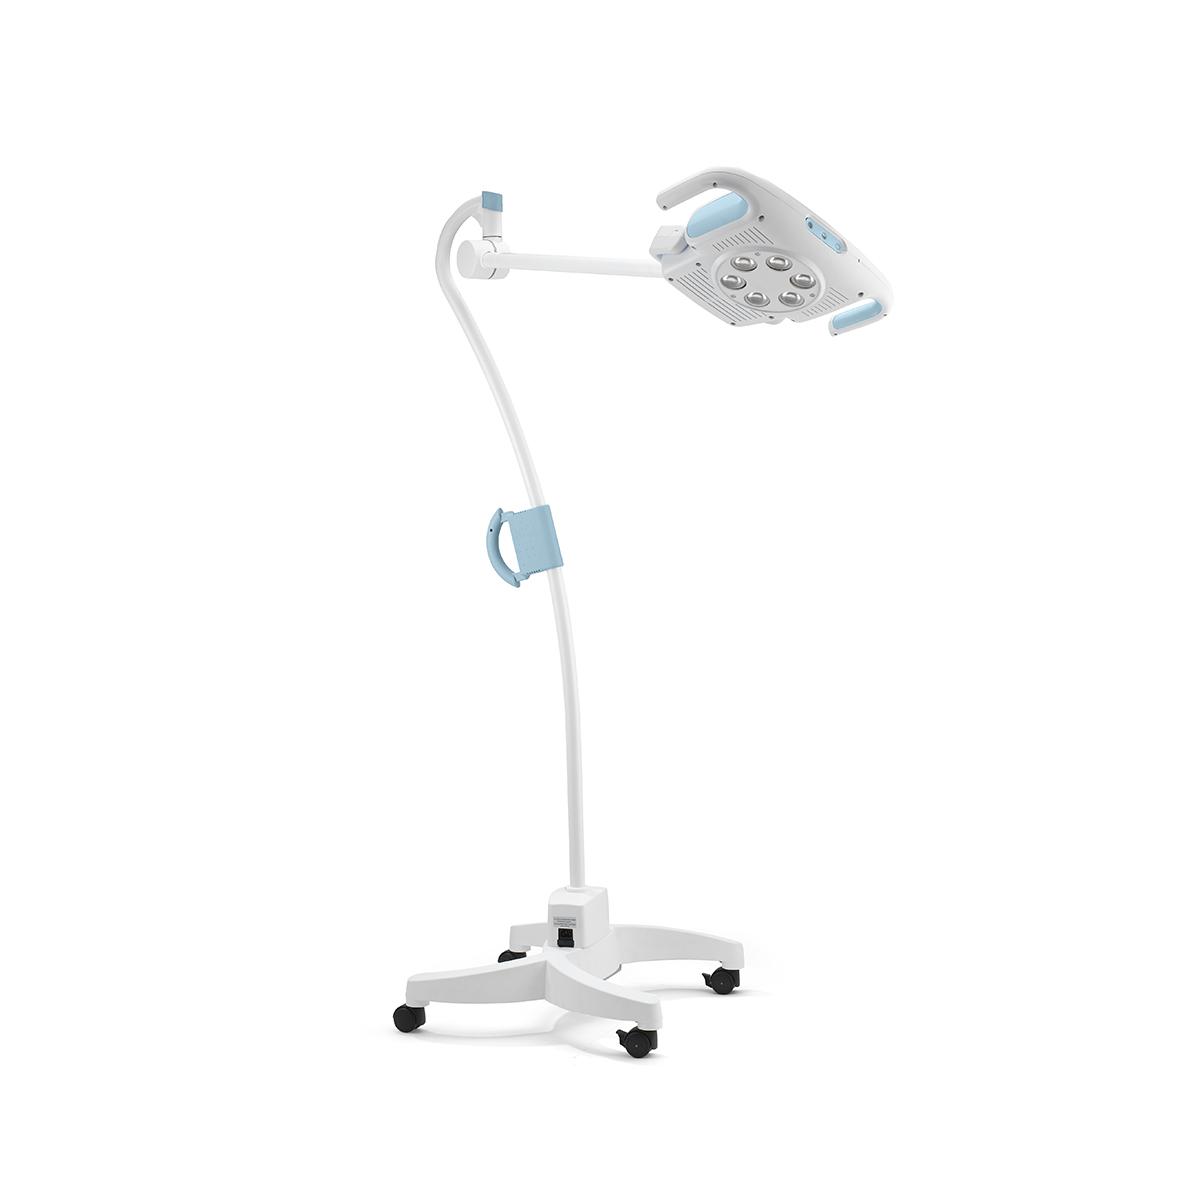 Green Series™ 900 Veterinary Procedure Light on mobile stand with wheels